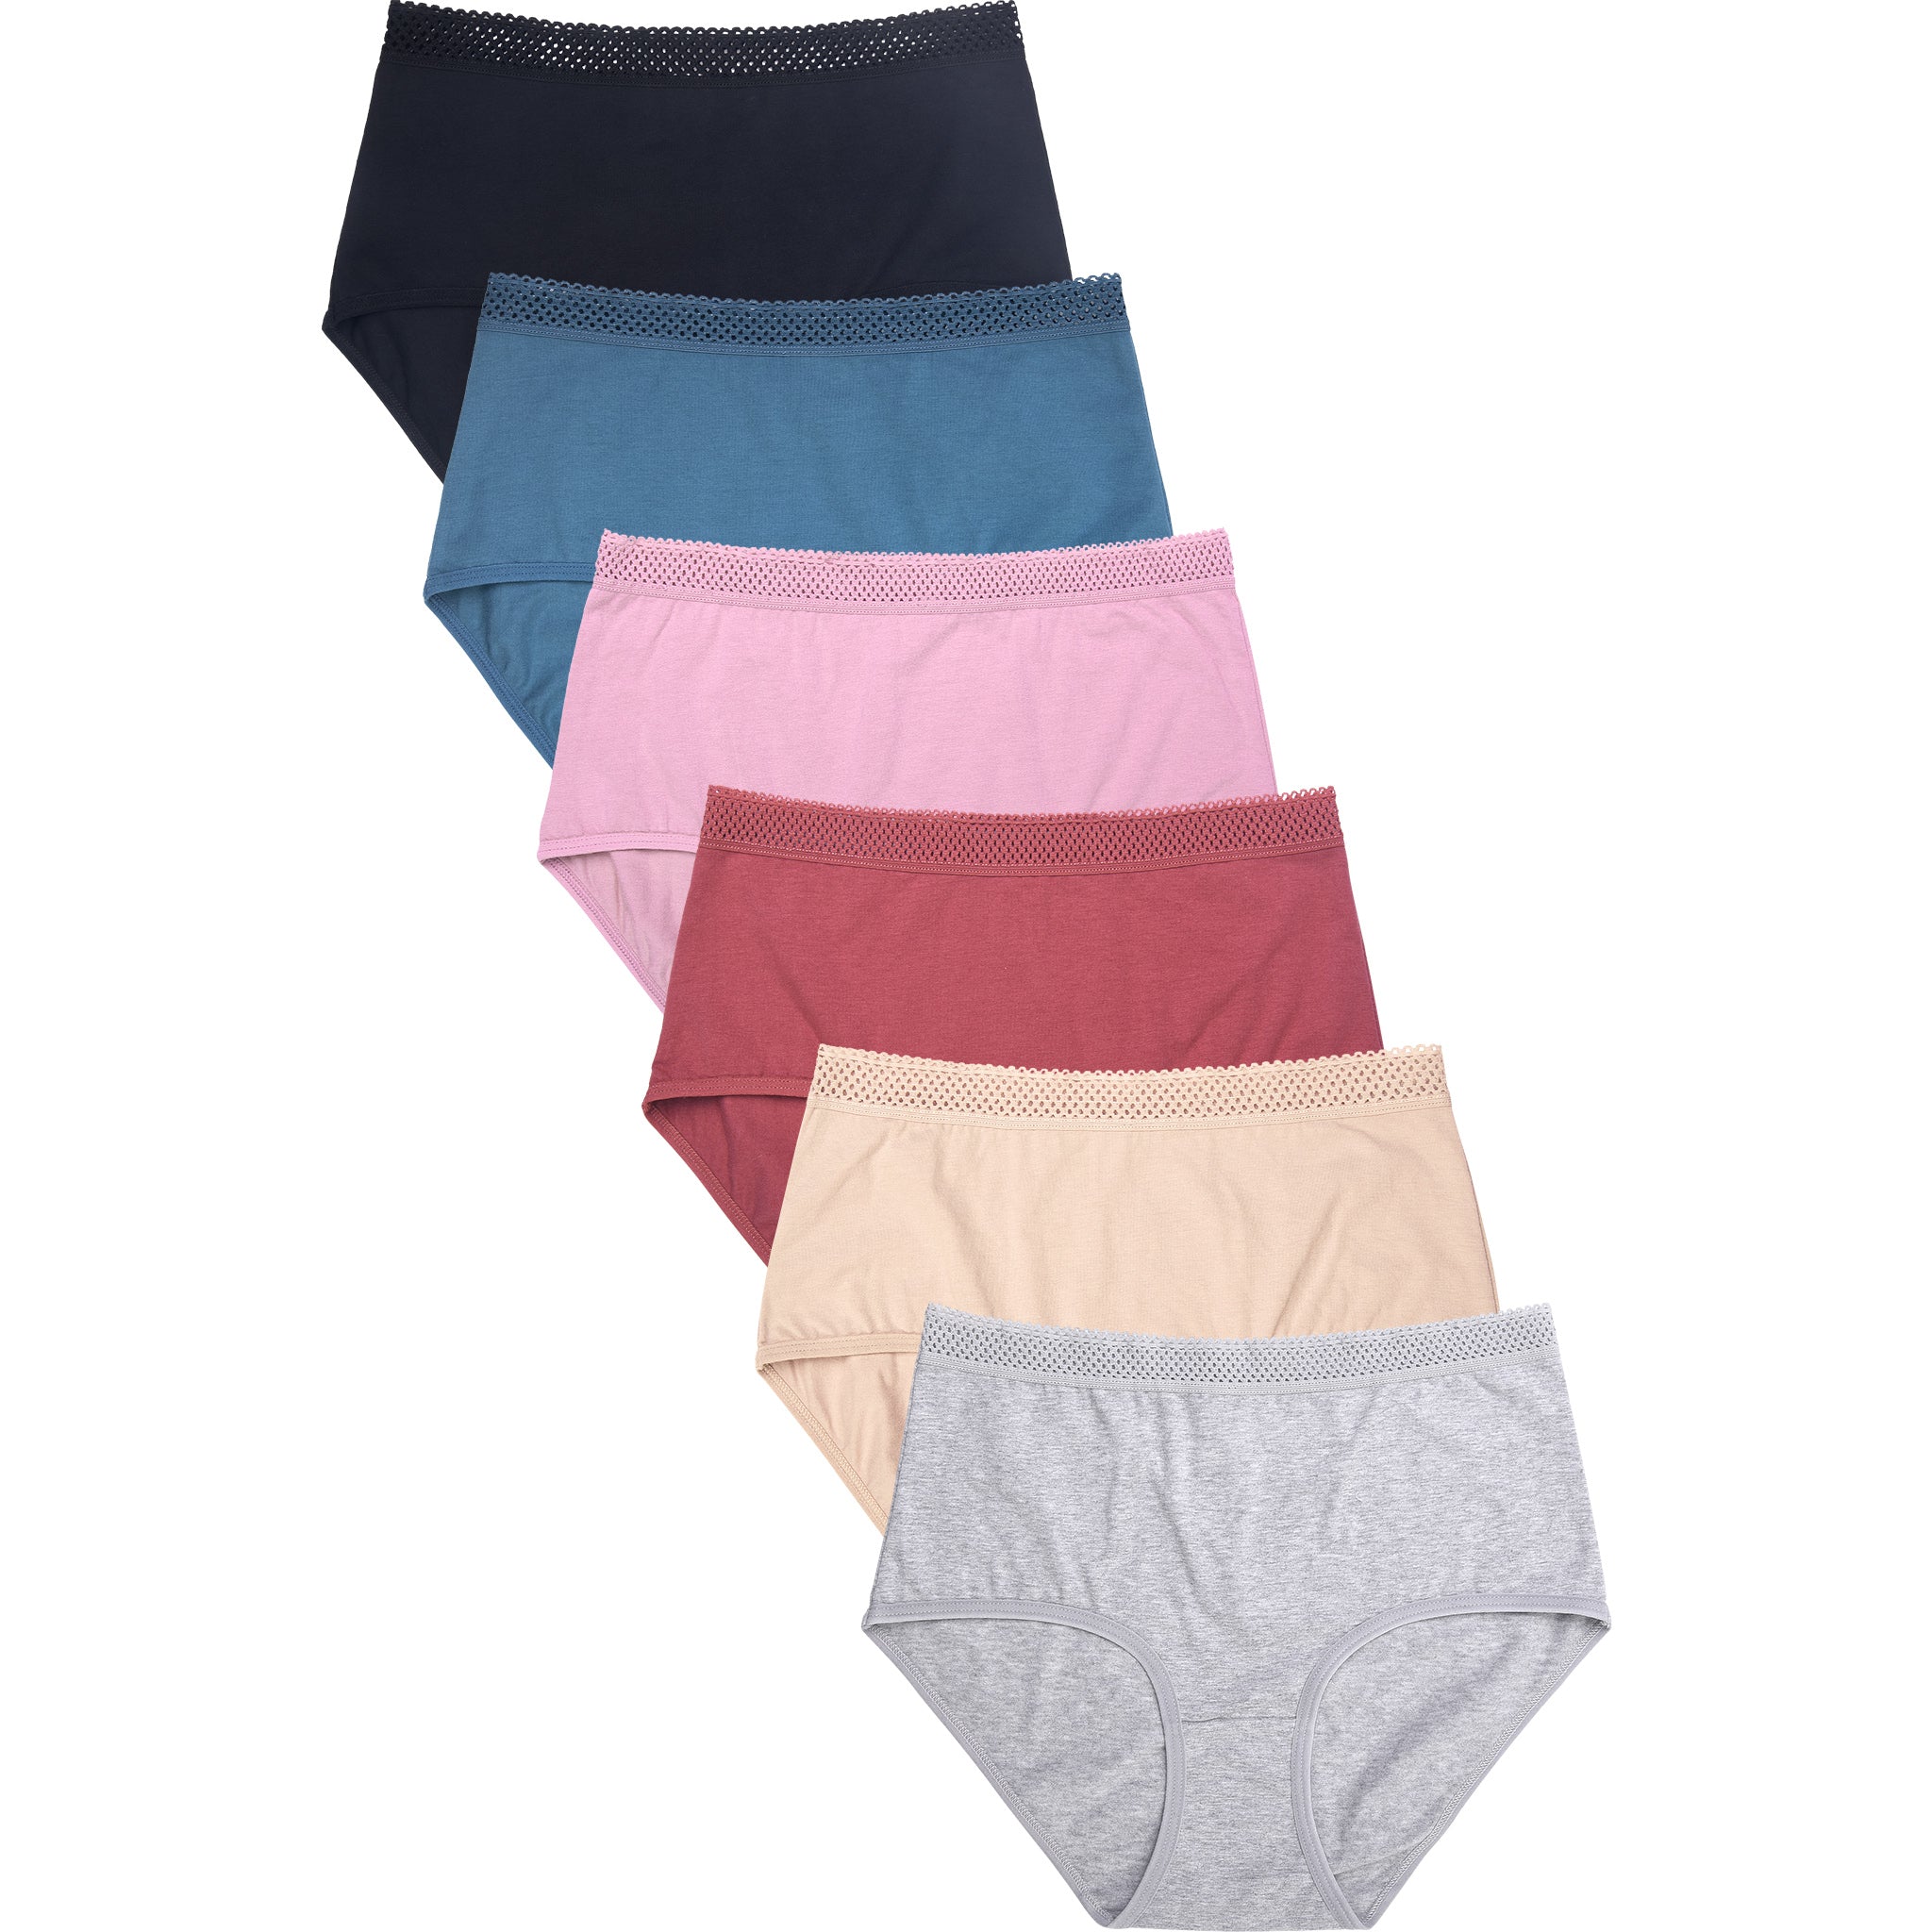 Best Fitting Panty Women's Cotton Stretch Brief Panties, 4-Pack ...